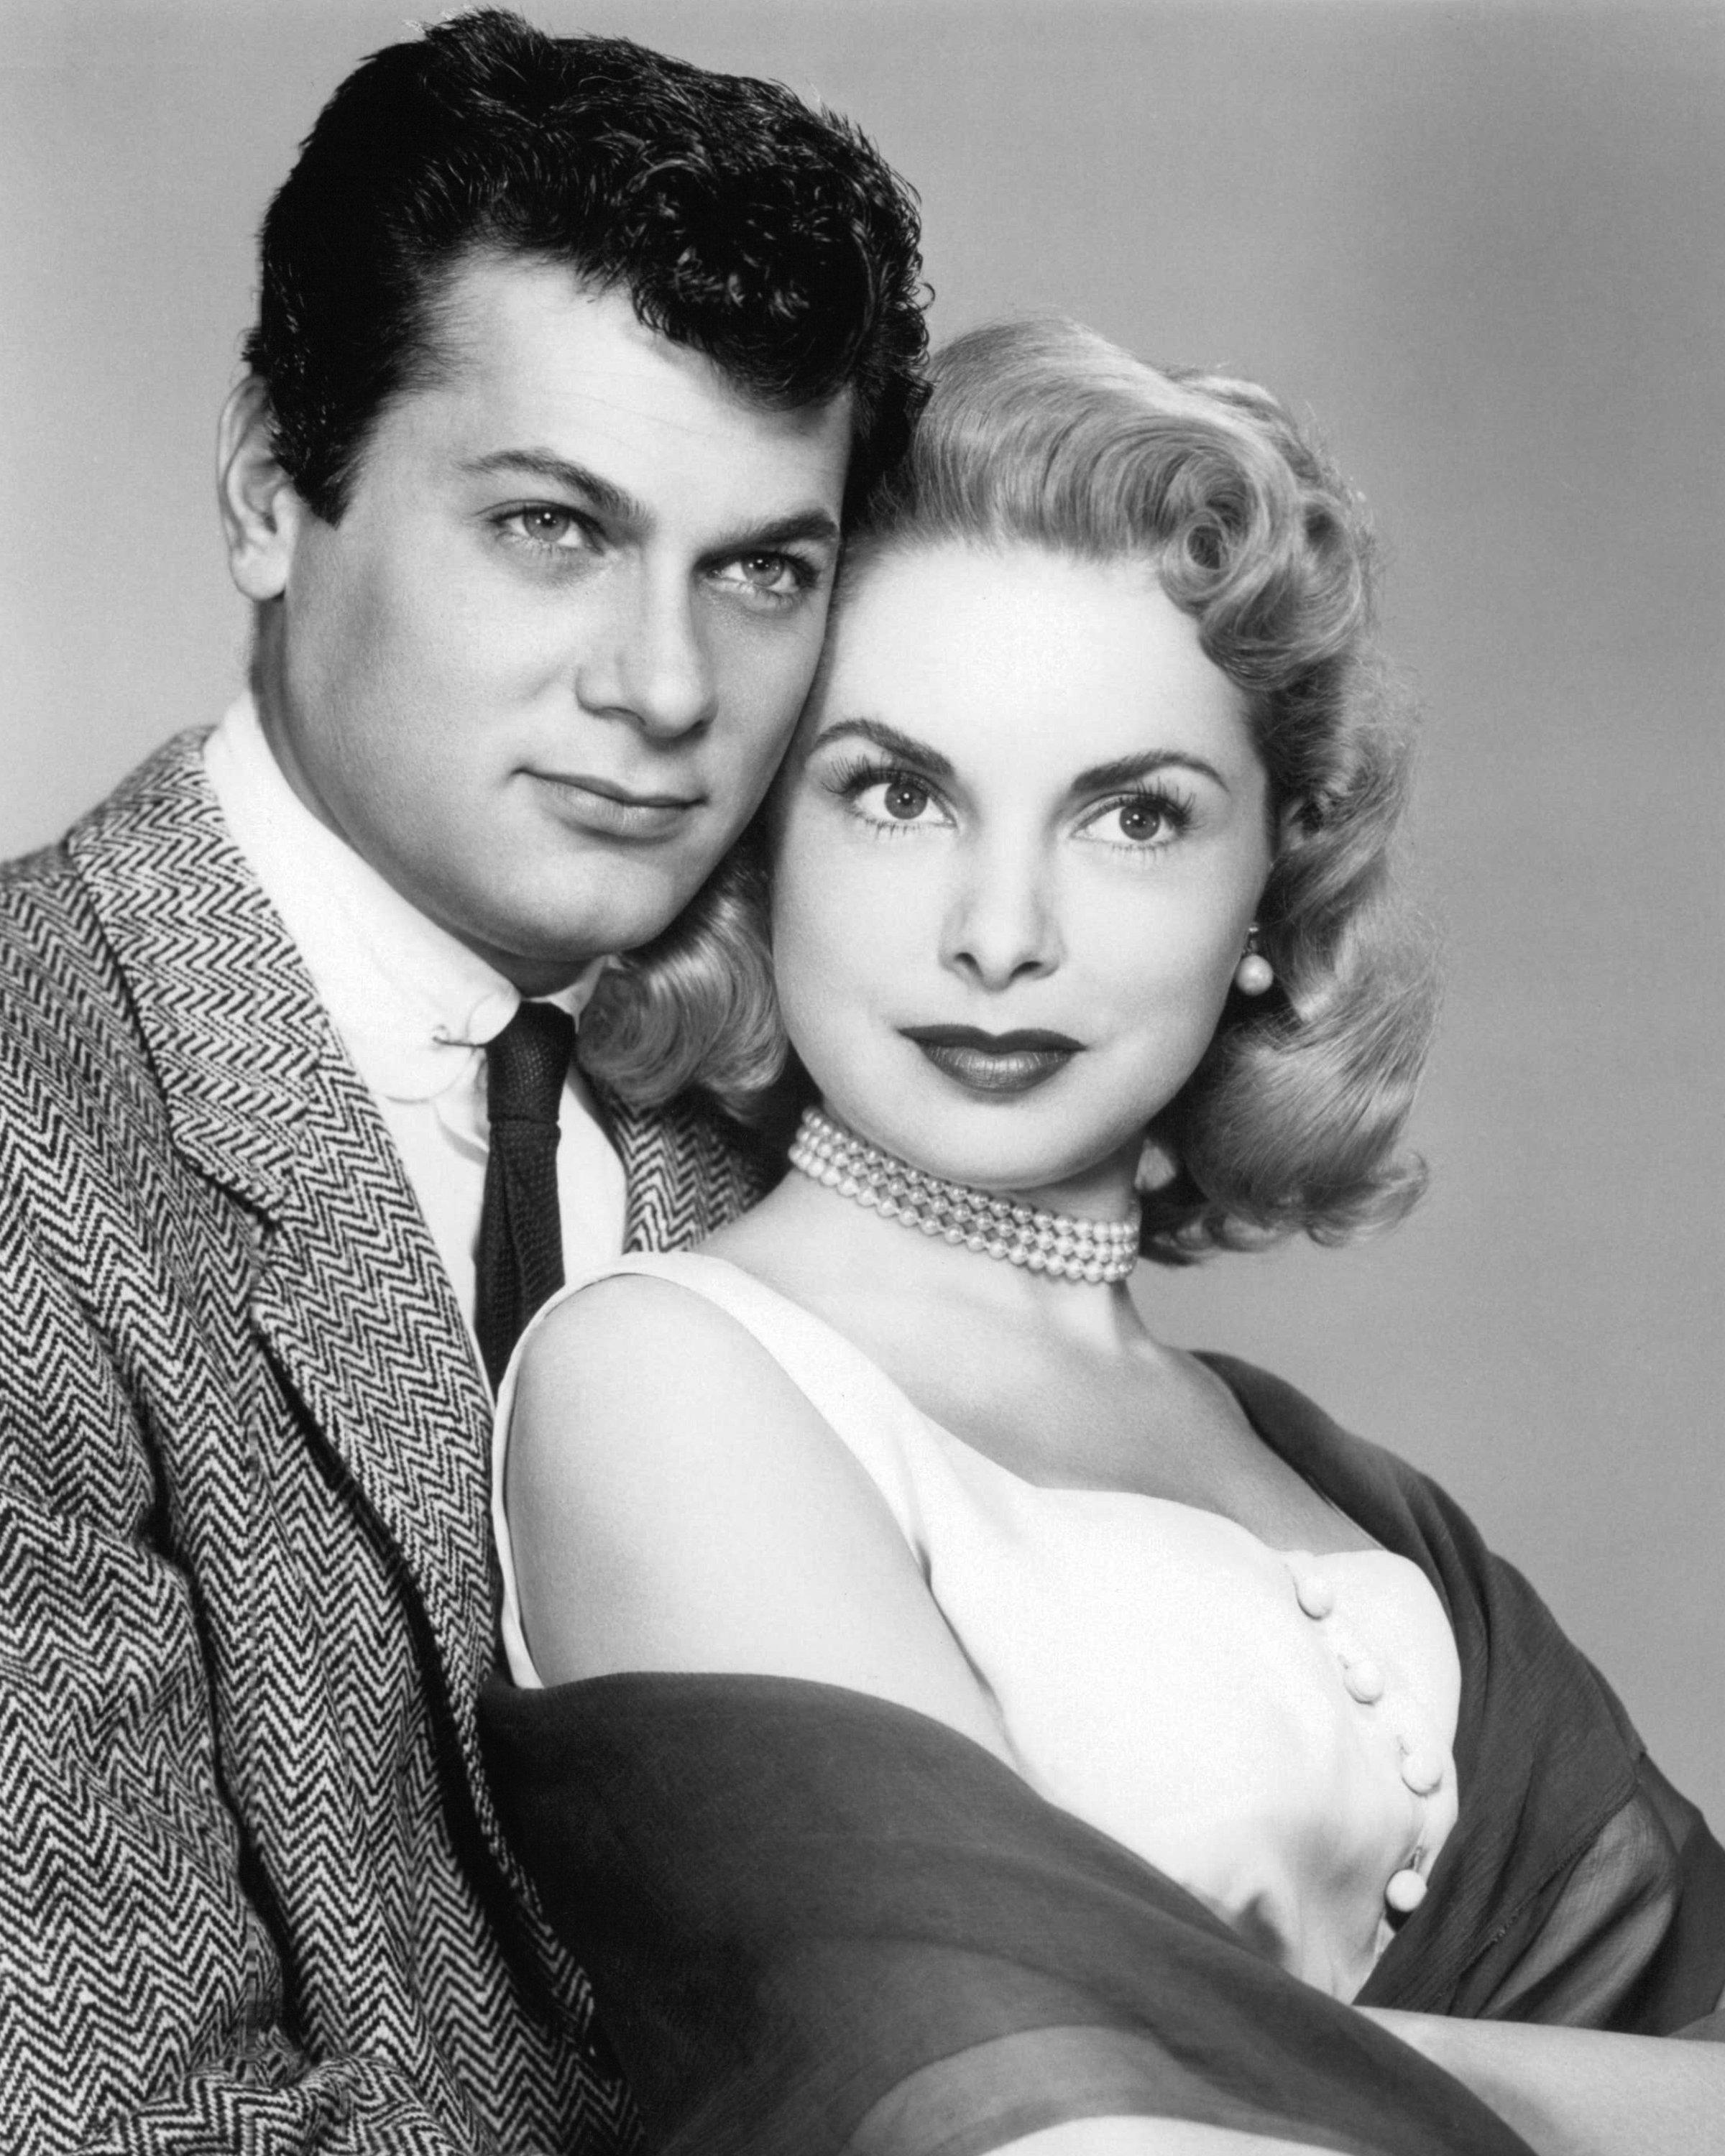 Tony Curtis and actress Janet Leigh, circa 1955. | Source: Public Domain, Wikimedia Commons